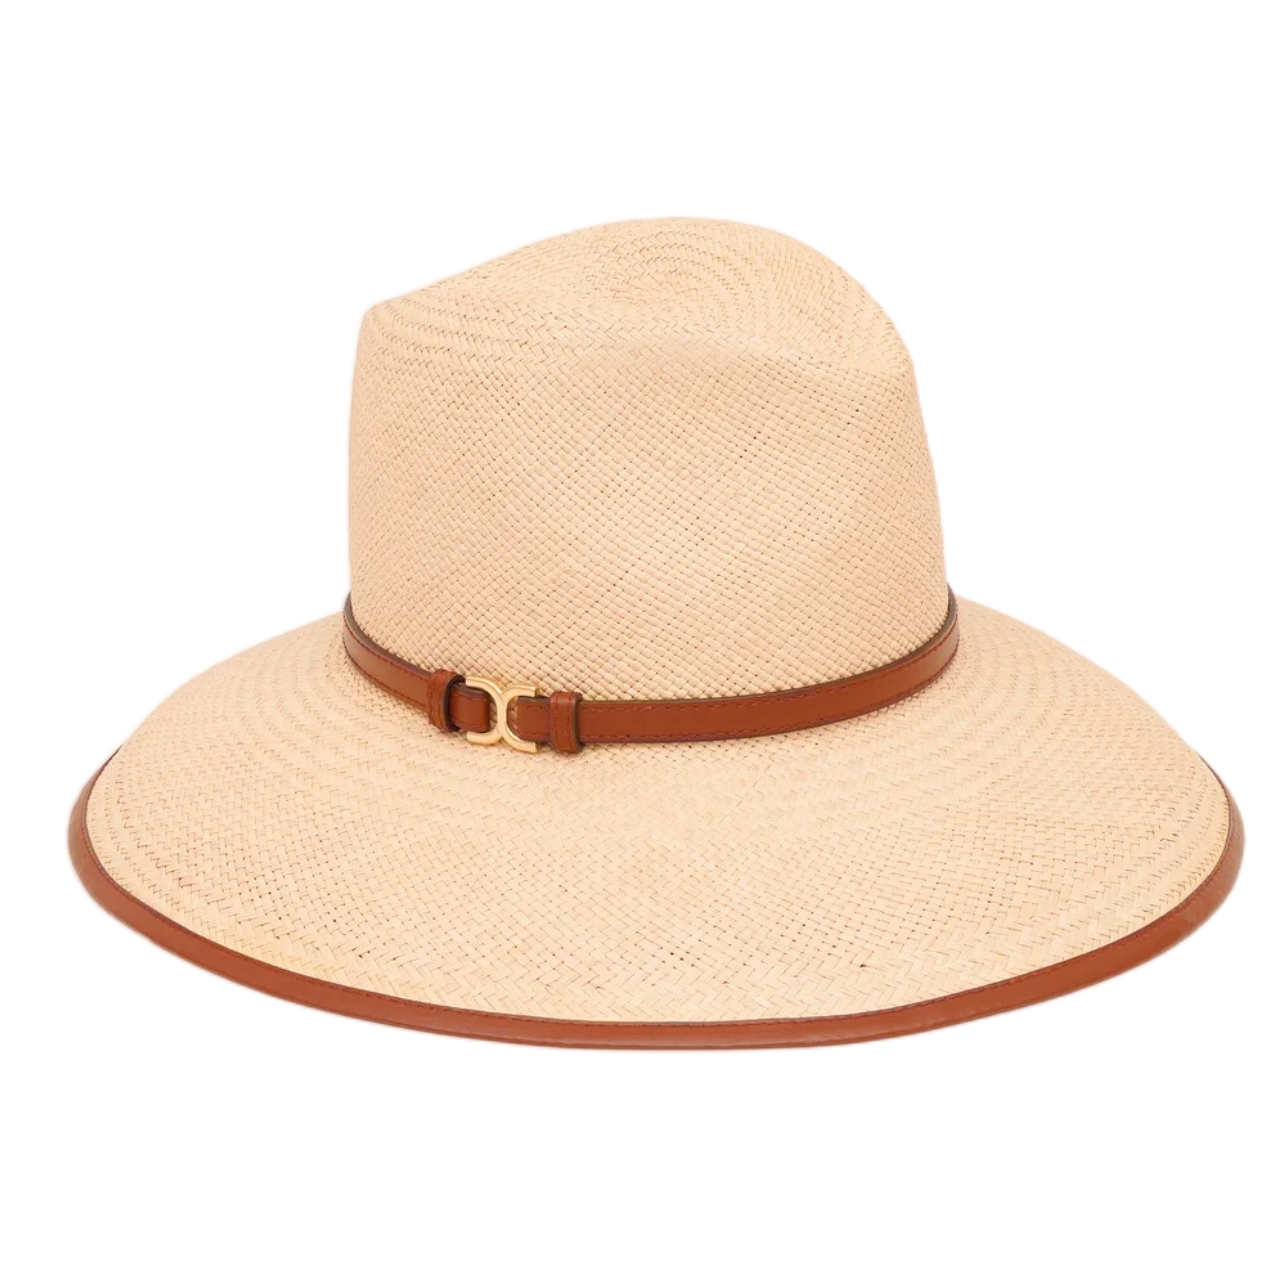 Chloe straw fedora hat with brown leather trimming